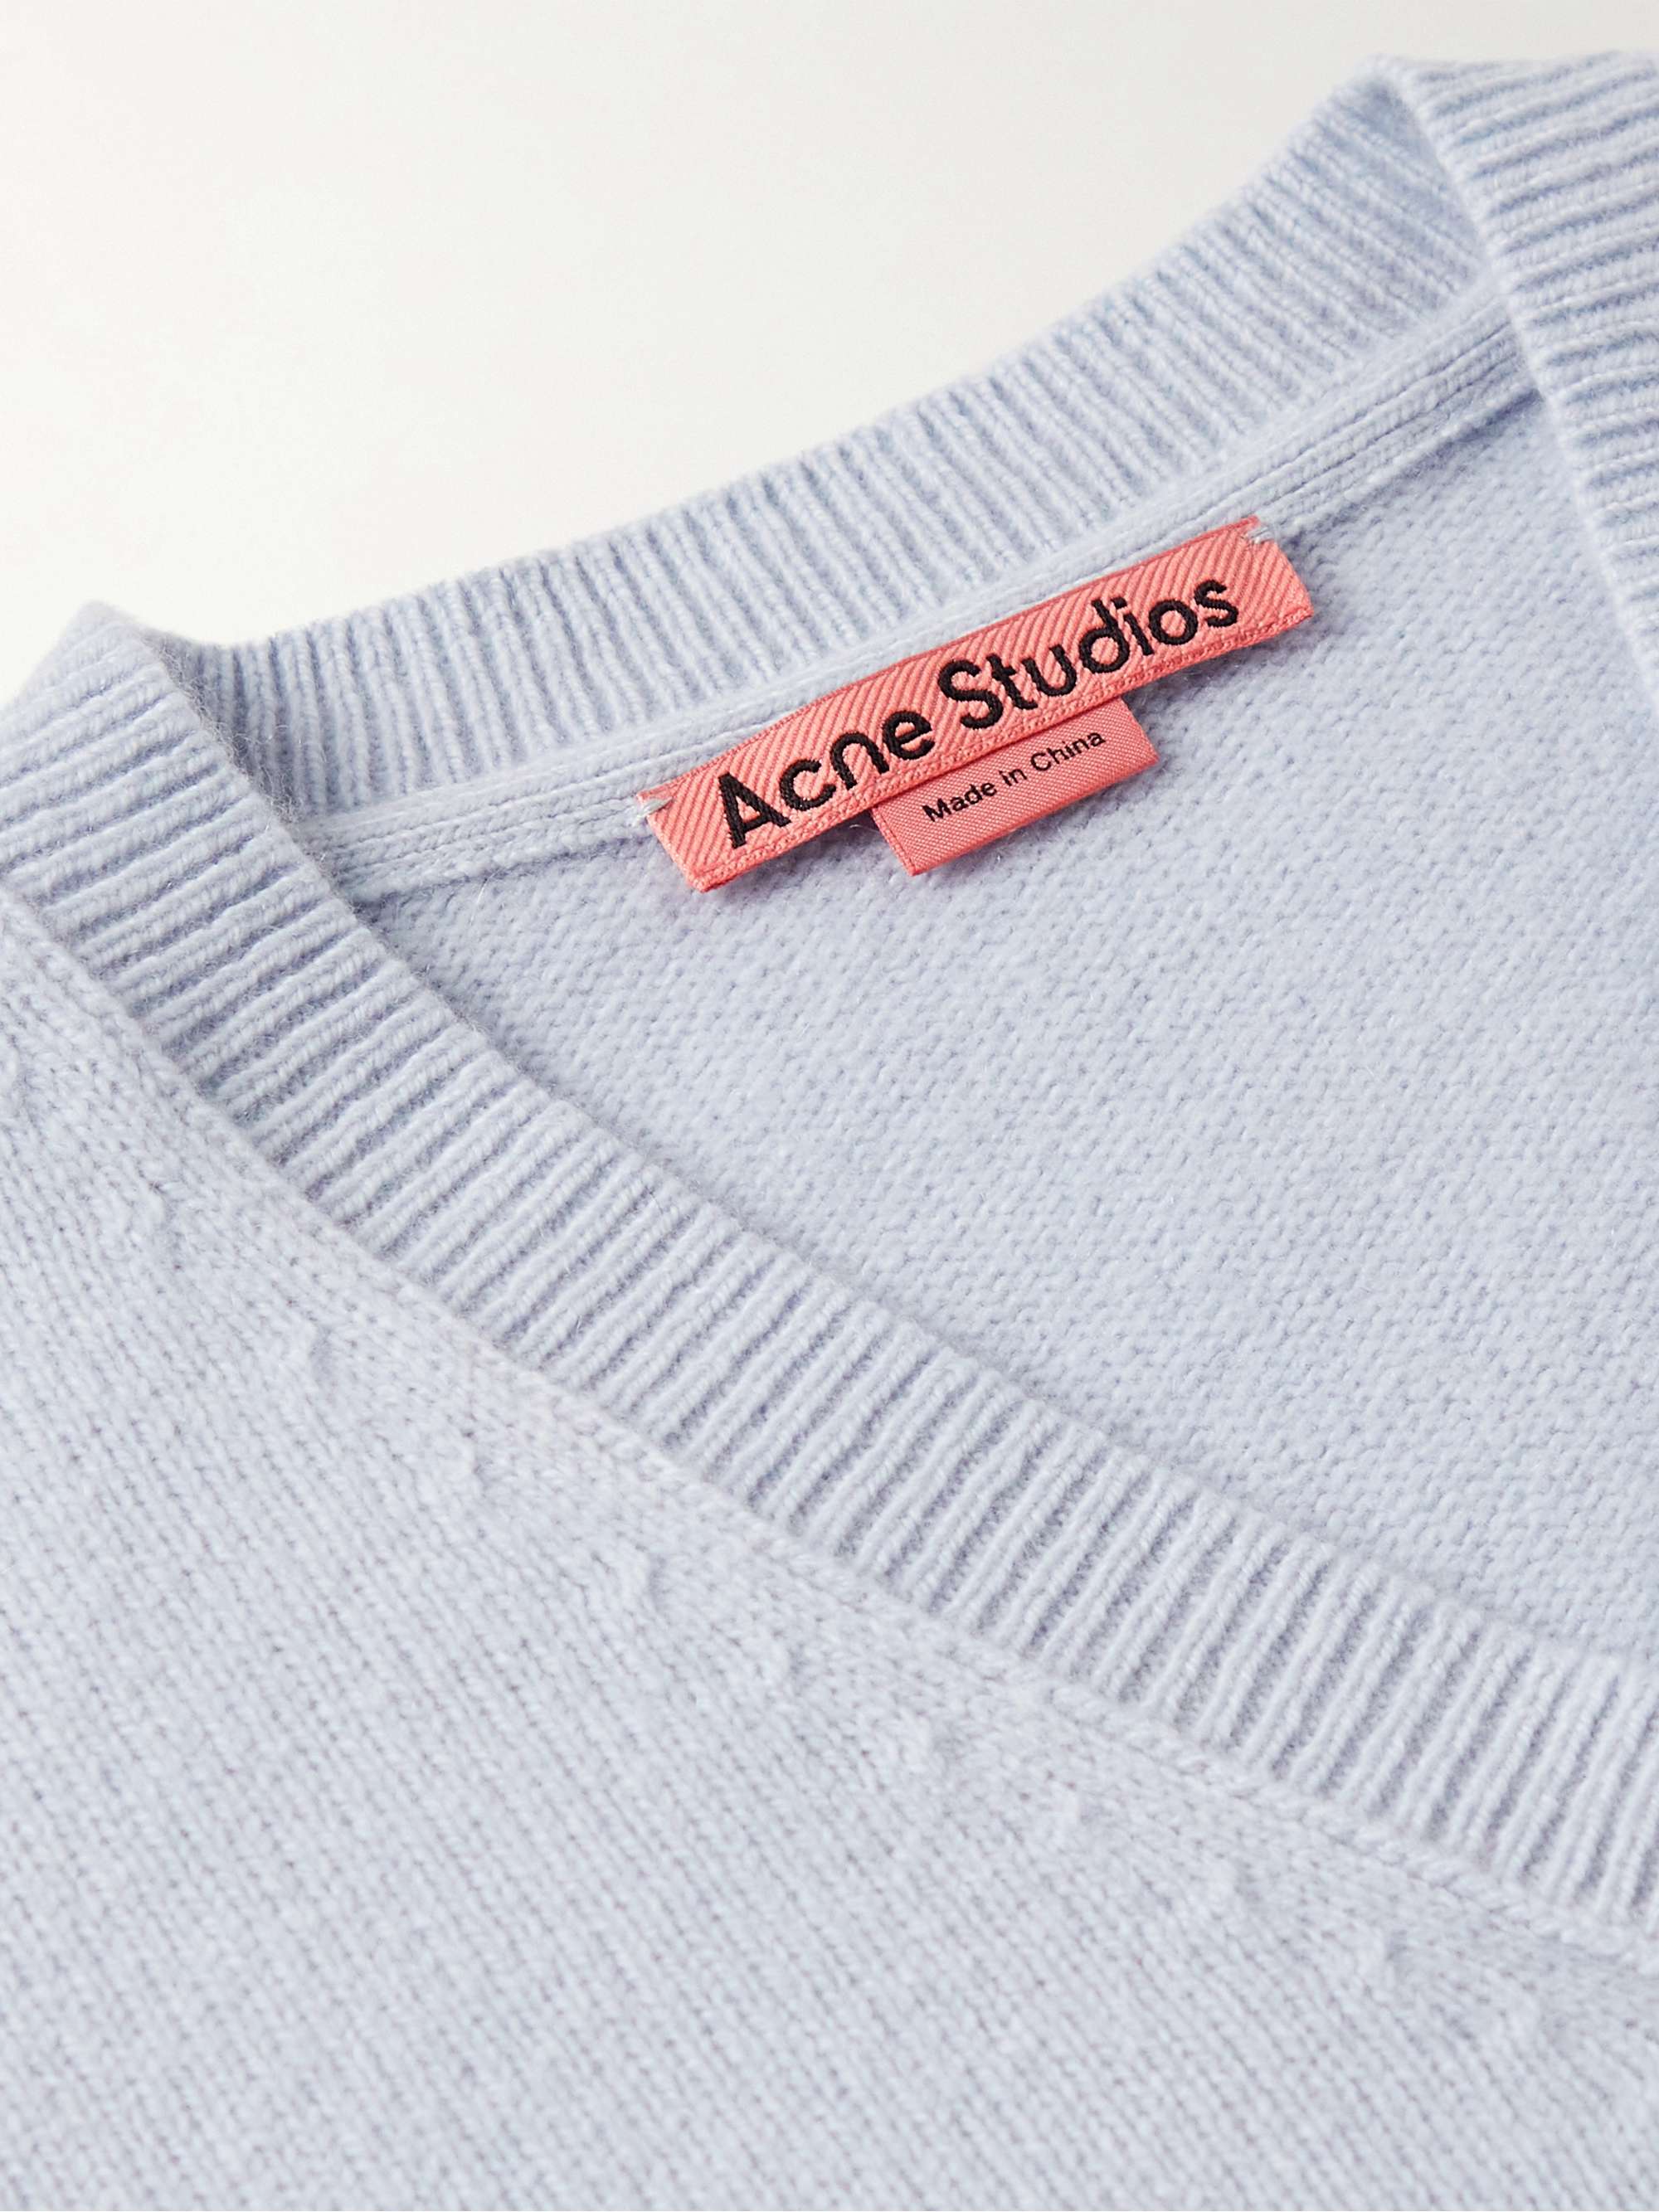 ACNE STUDIOS Wool and Cashmere-Blend Sweater